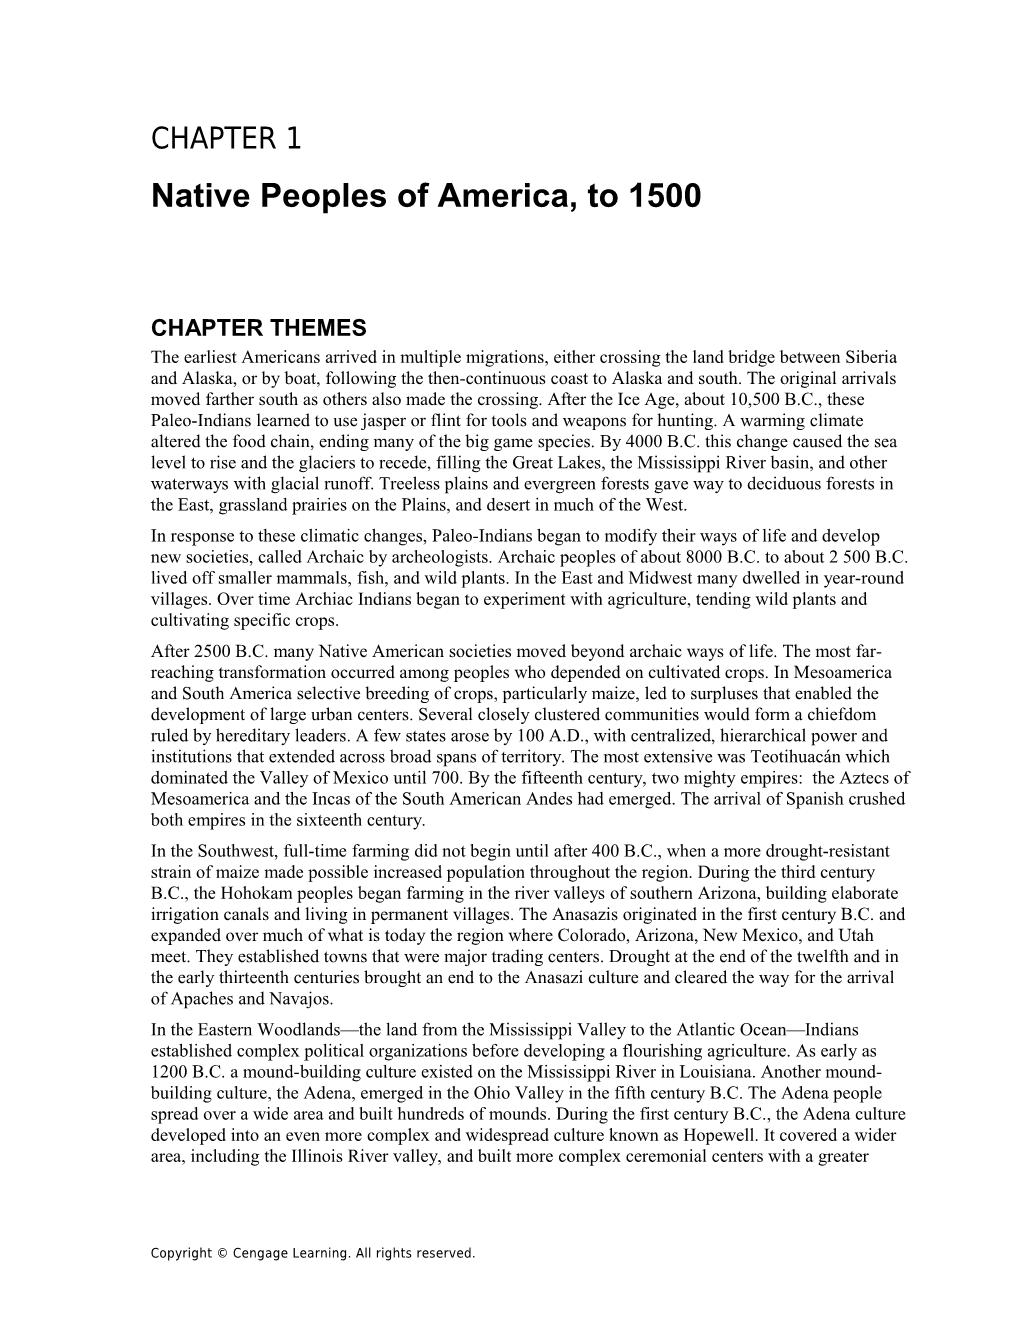 Chapter 1: Native Peoples of America, to 1500 1